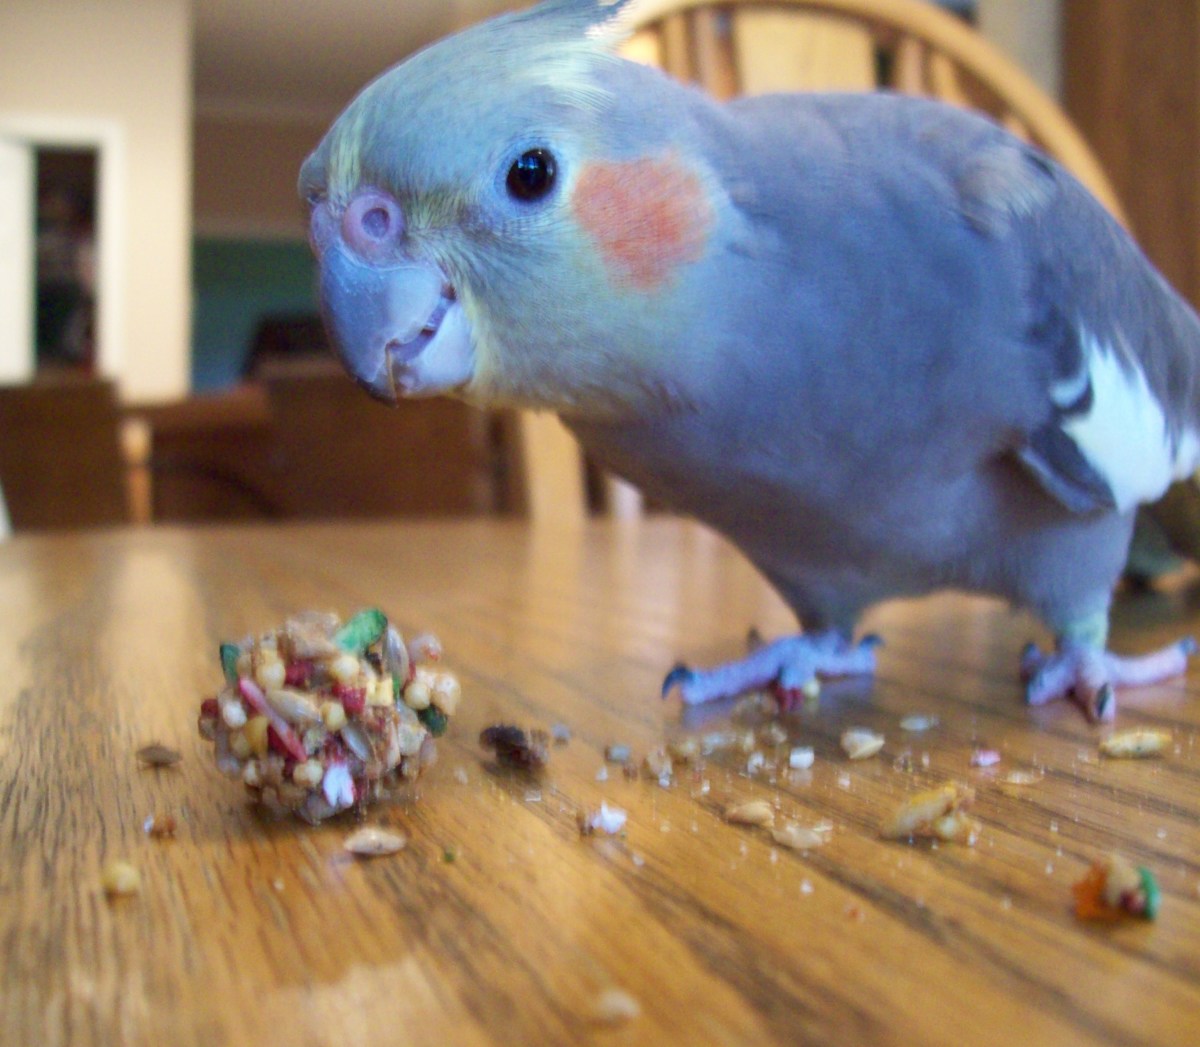 Here's what Rocky looks like as he eagerly pecks at a treat.